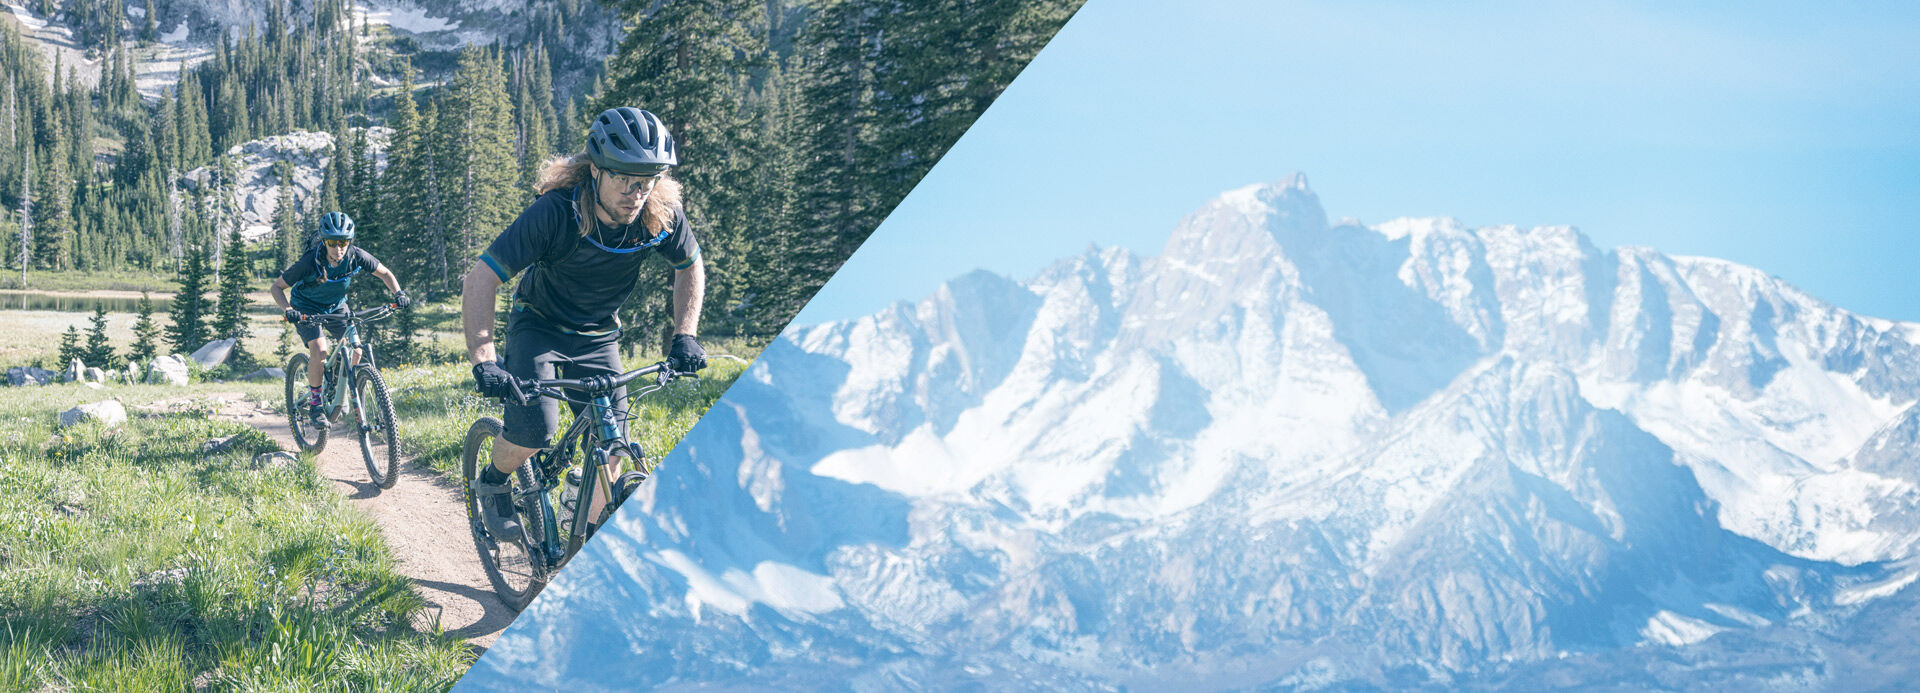 Unwrap the Adventure: A Mountain Bikers Christmas Gift Guide | Cykel House